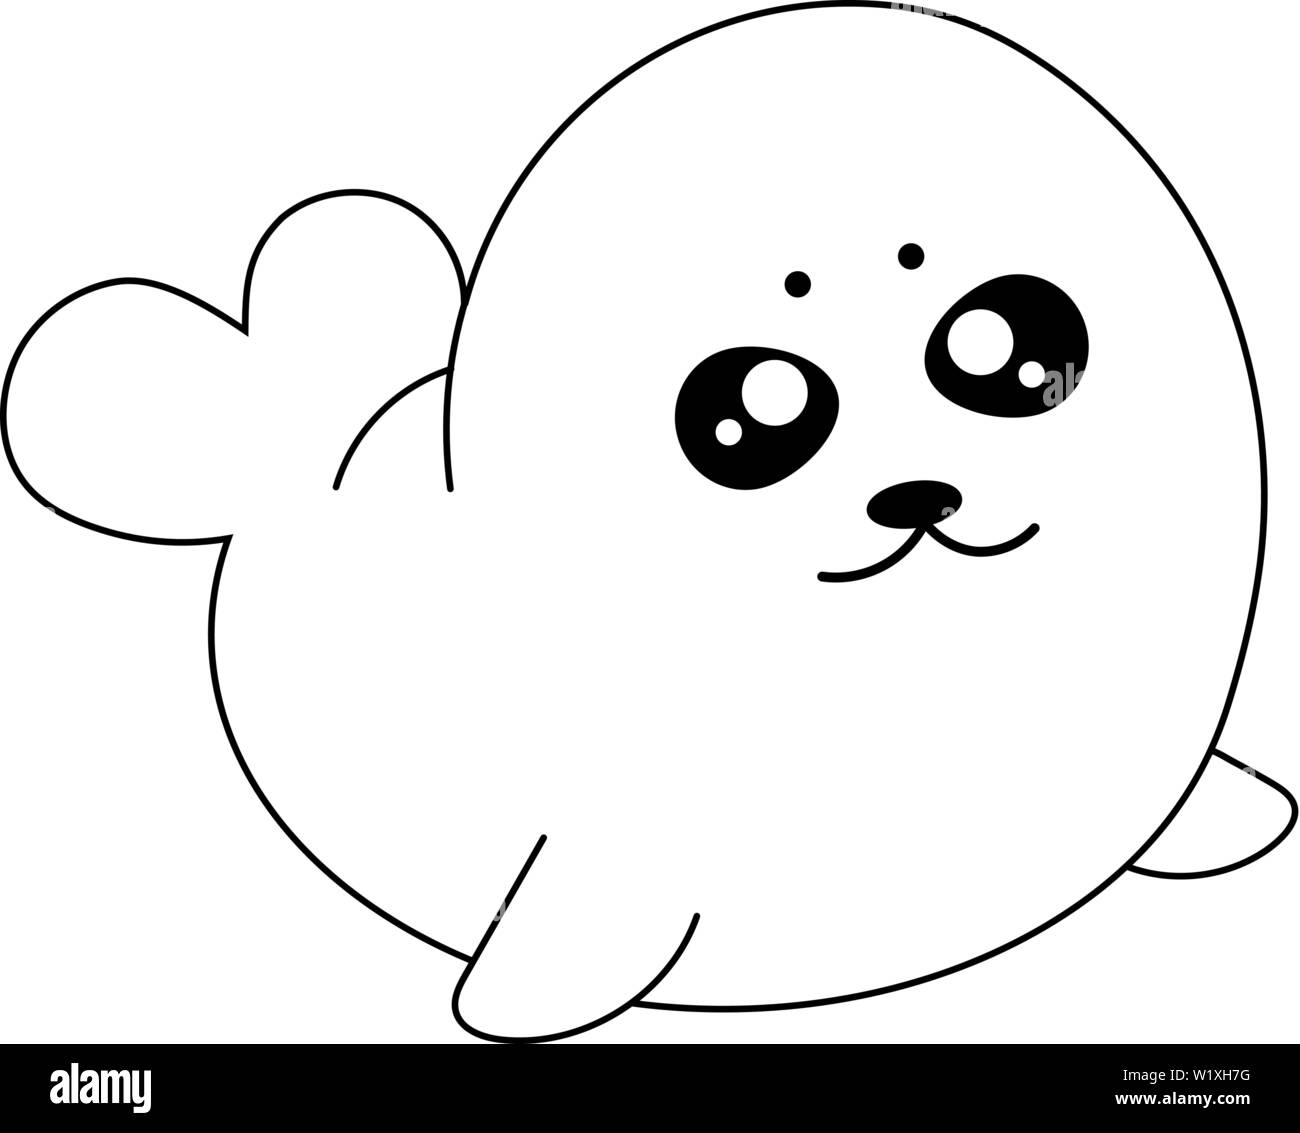 Kawaii Harp Baby Seal. Cute cartoon character. Vector illustration isolated on white background Stock Vector